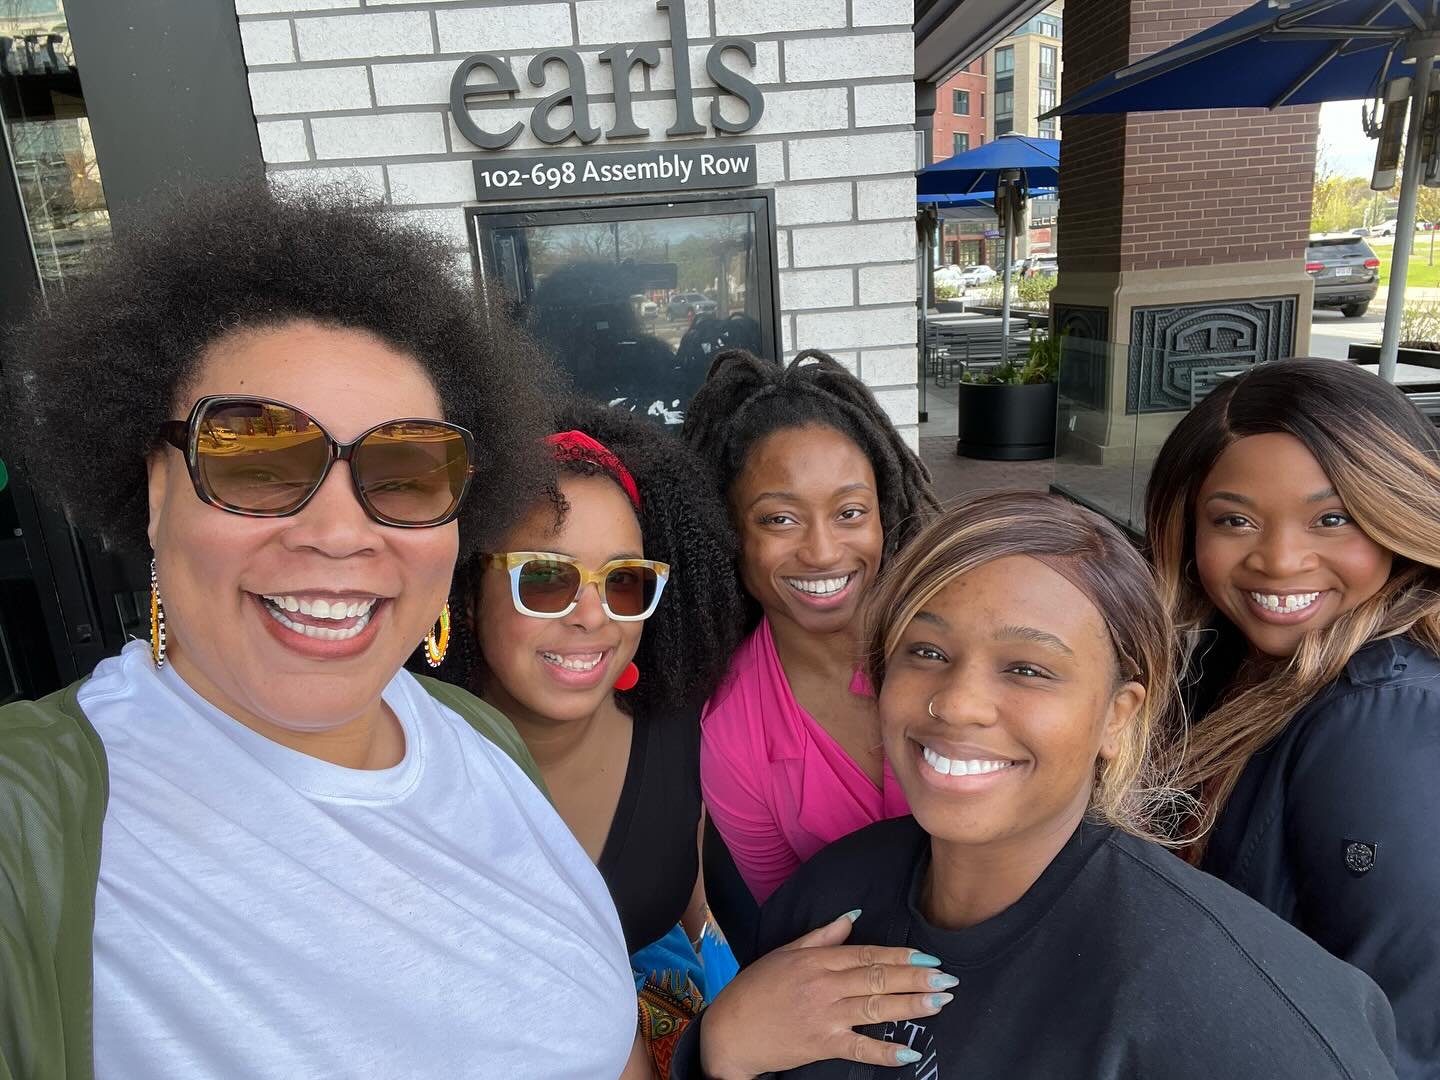 The Boston chapter had a great brunch today. We talked goals, overcoming struggles, business, career development, and more. The vibes were immaculate, as always. #forblackgirlsinc #bostonchapter #meetup #sisterhood #blackgirlmagic